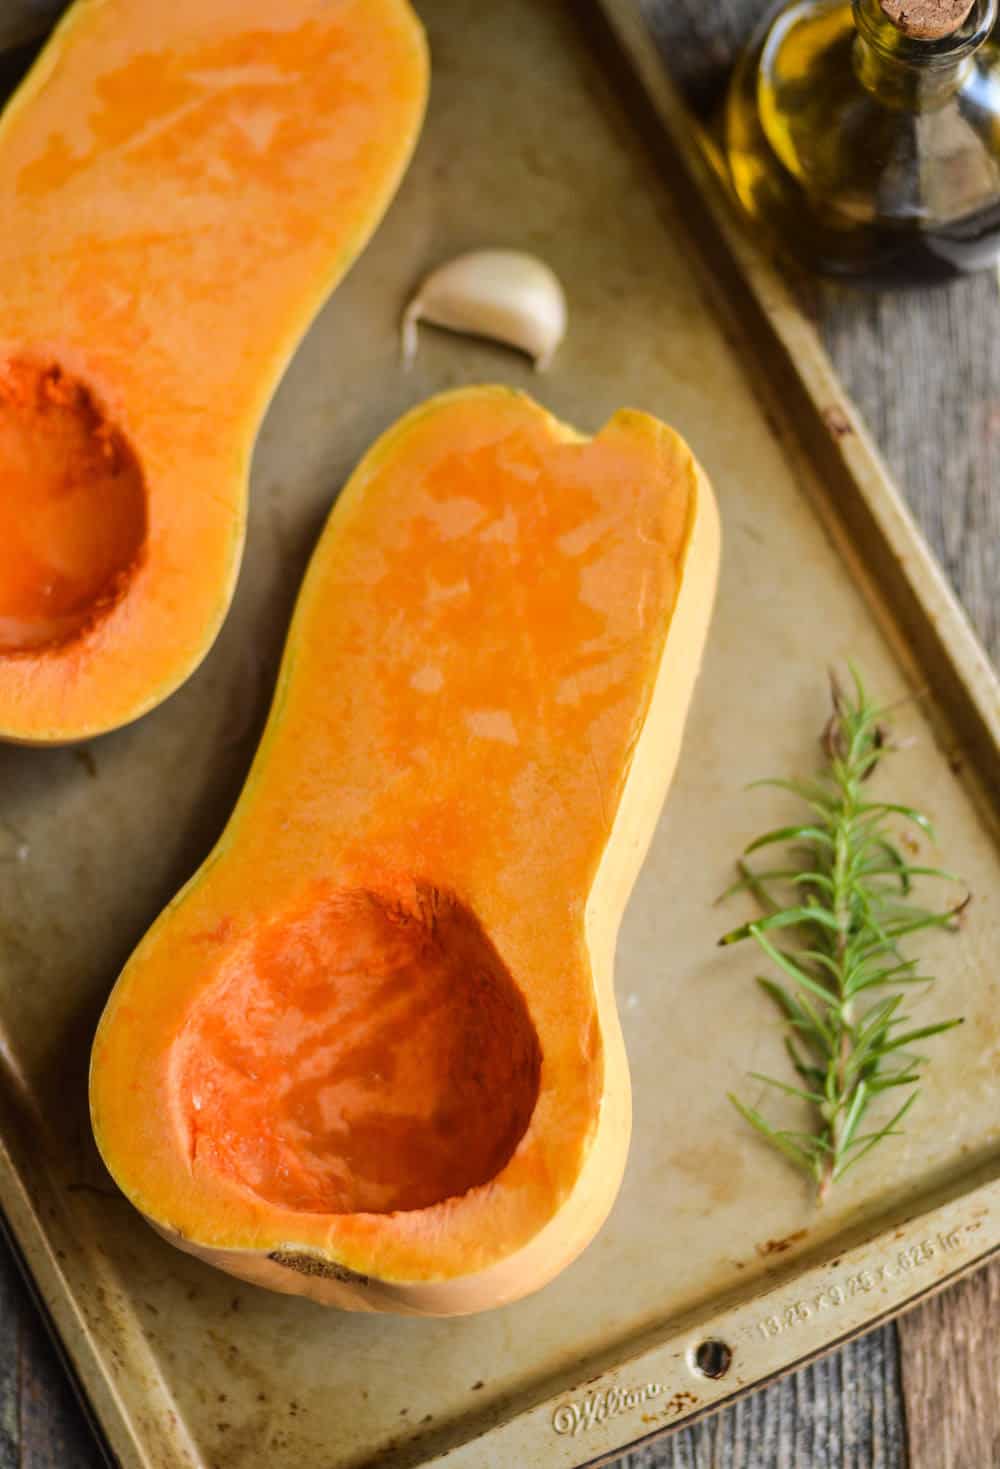 The garlic and rosemary make this roasted butternut squash recipe! Perfect for a weeknight dinner or even a side for a holiday.